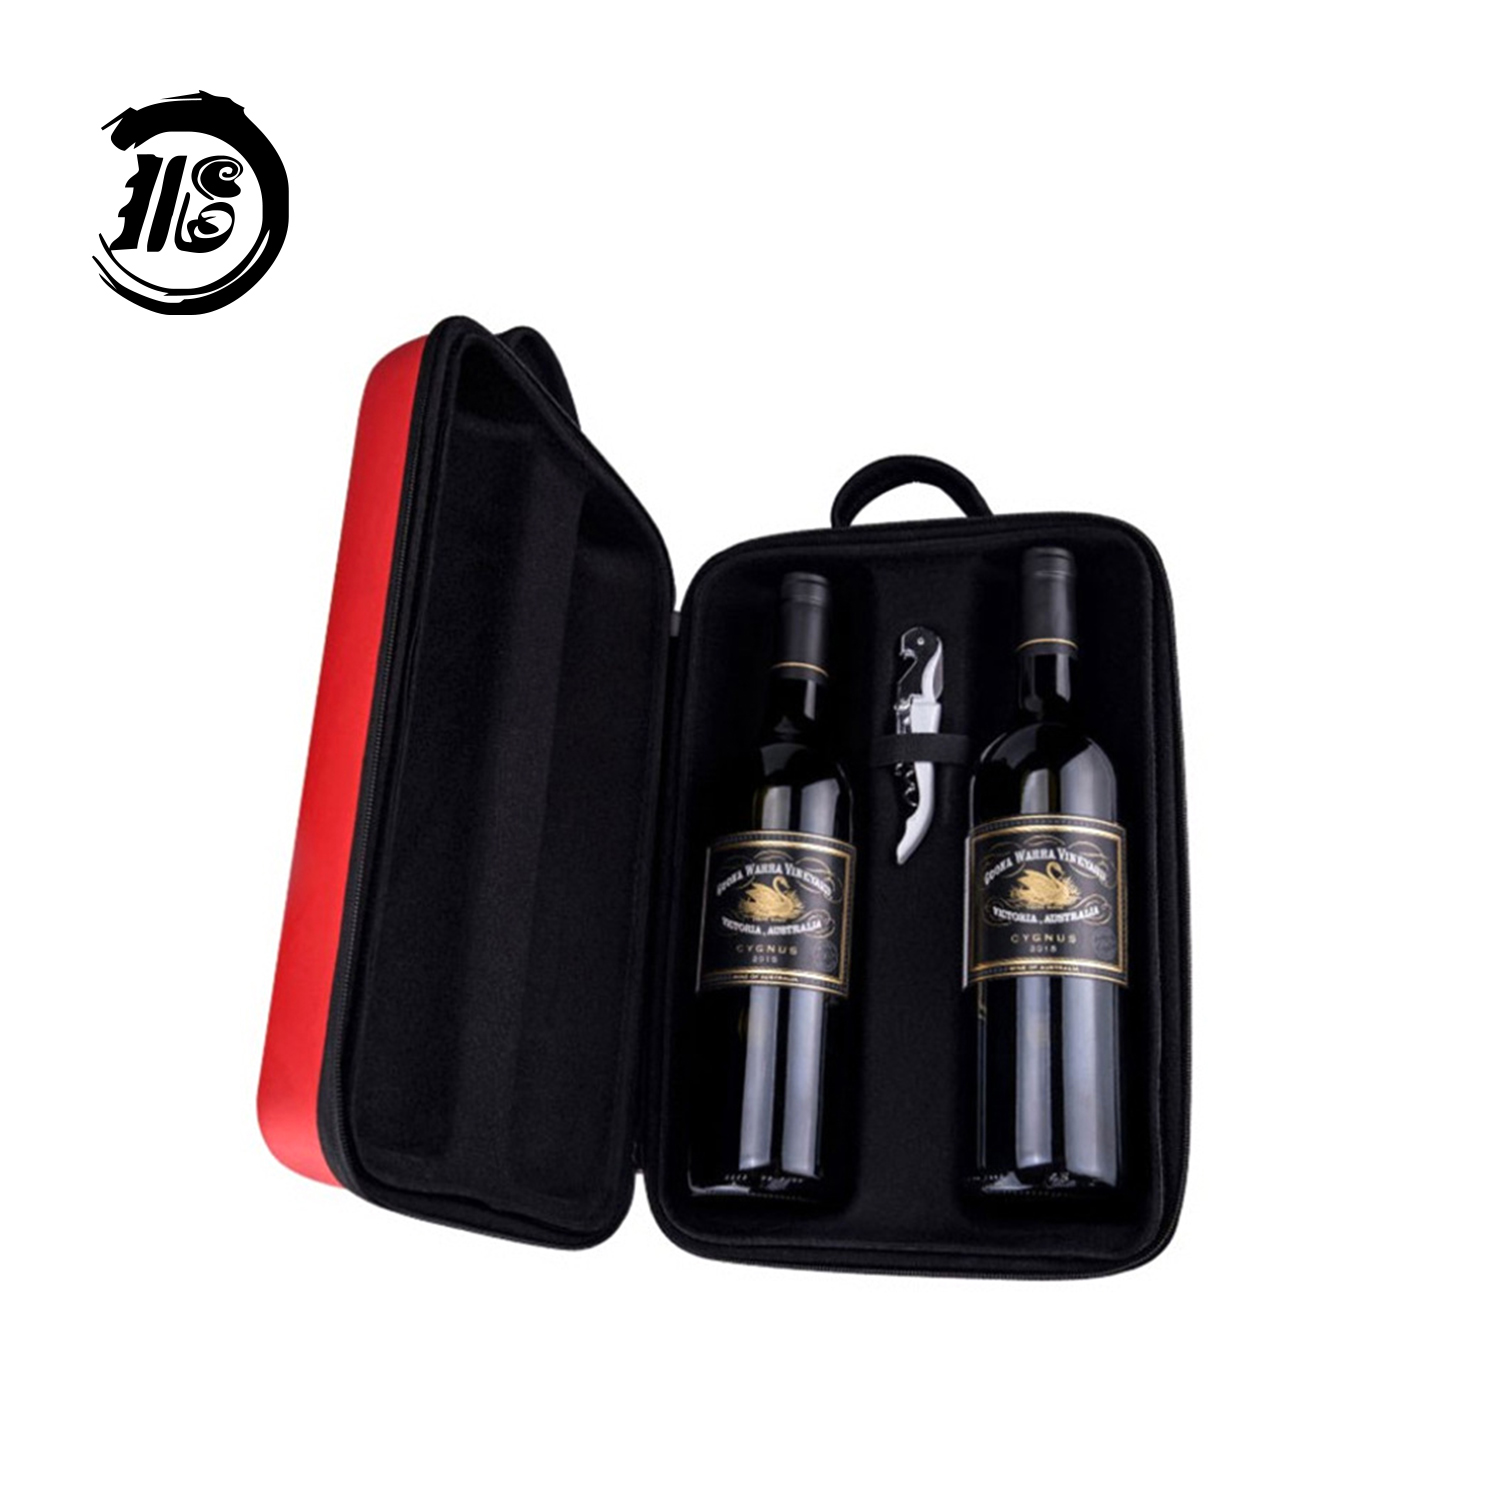 Portable EVA Protective Bag Carrying Case Wine Suitcase for Double Bottle of Wine